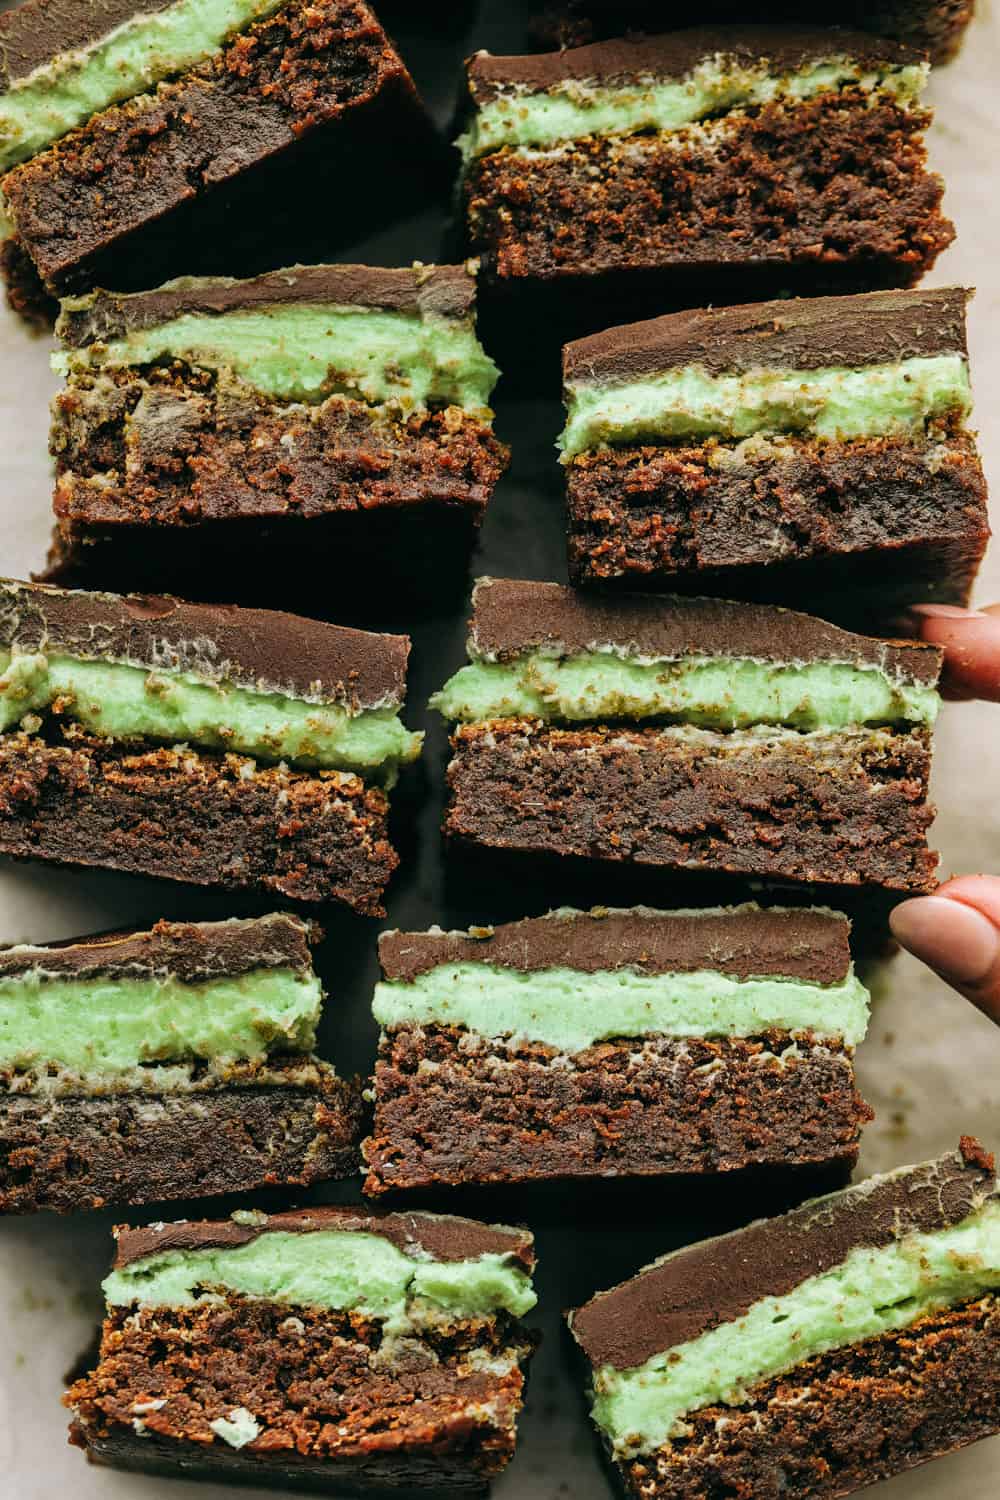 Mint brownies on their sides showing the layers. 